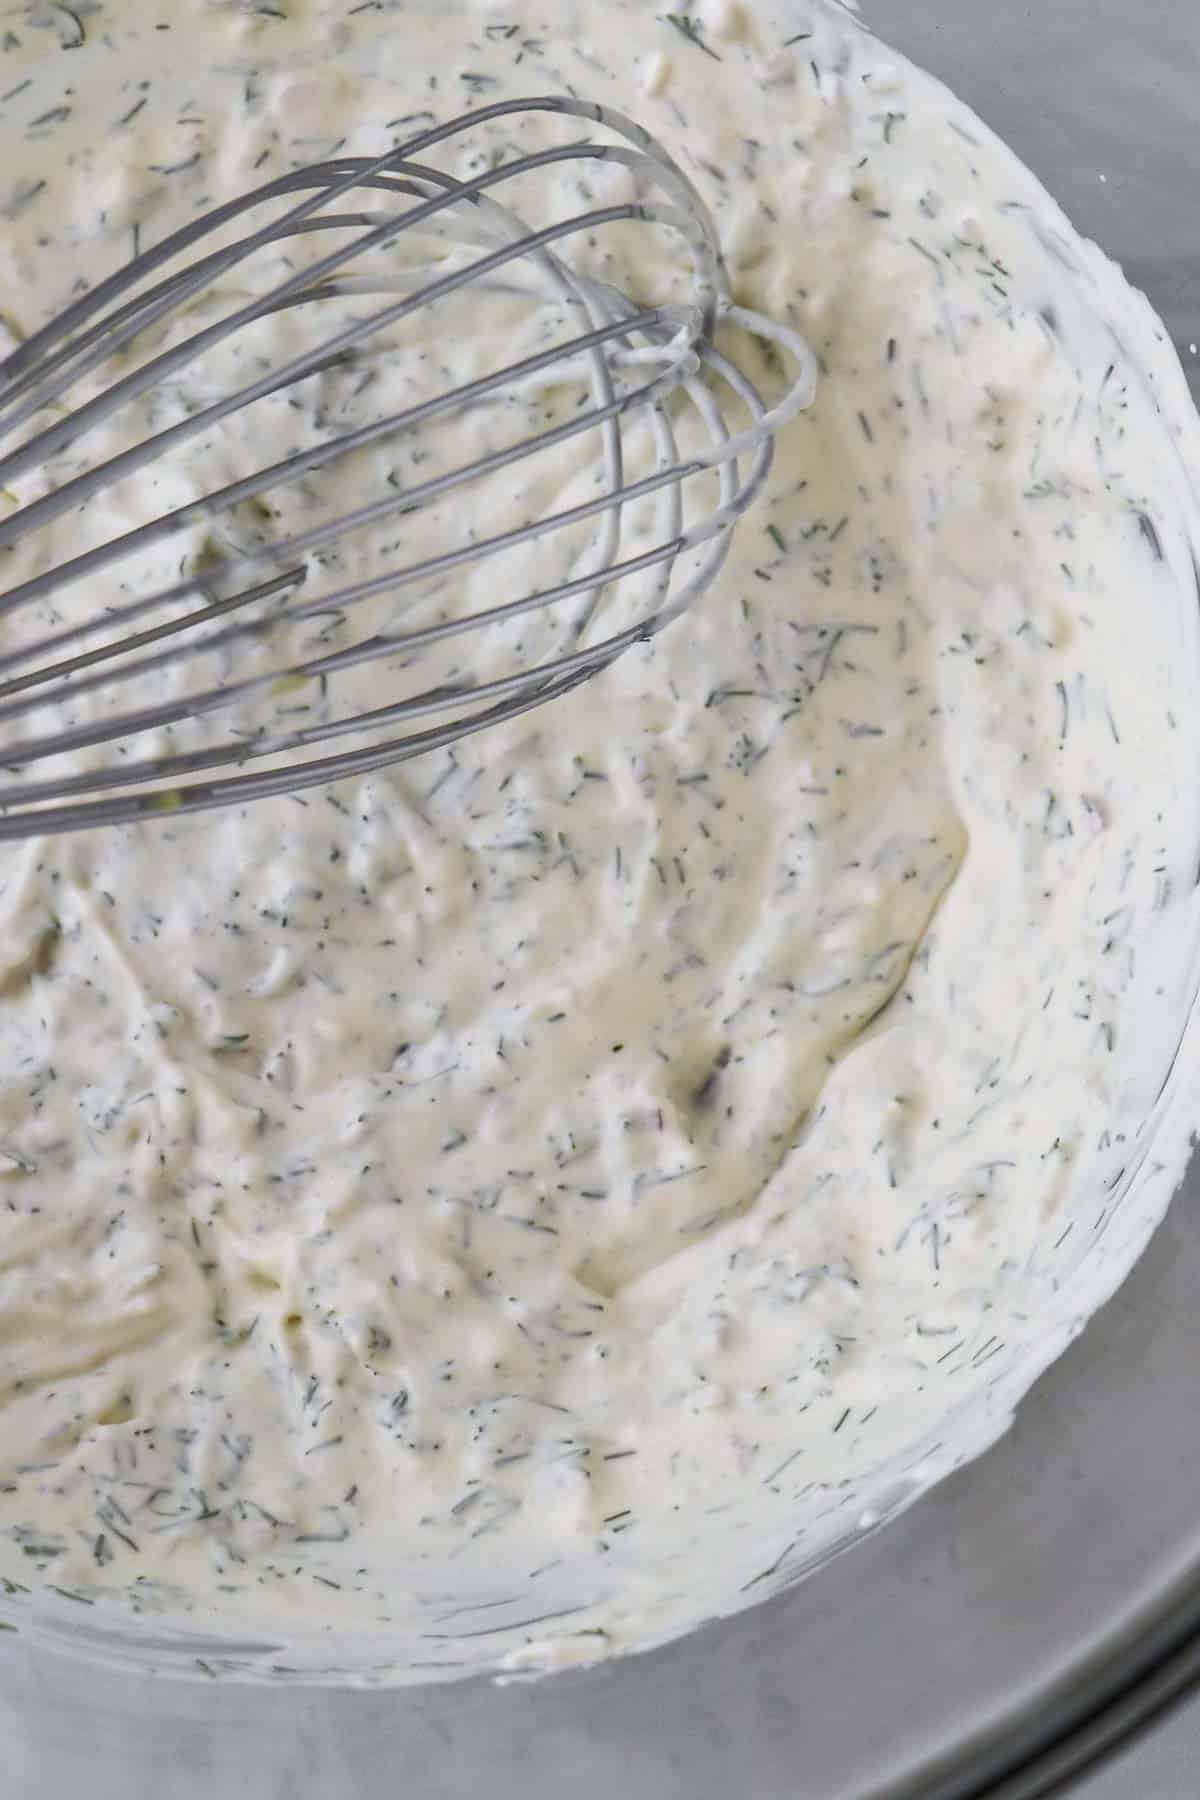 Creamy dill dressing in a glass bowl with a whisk.